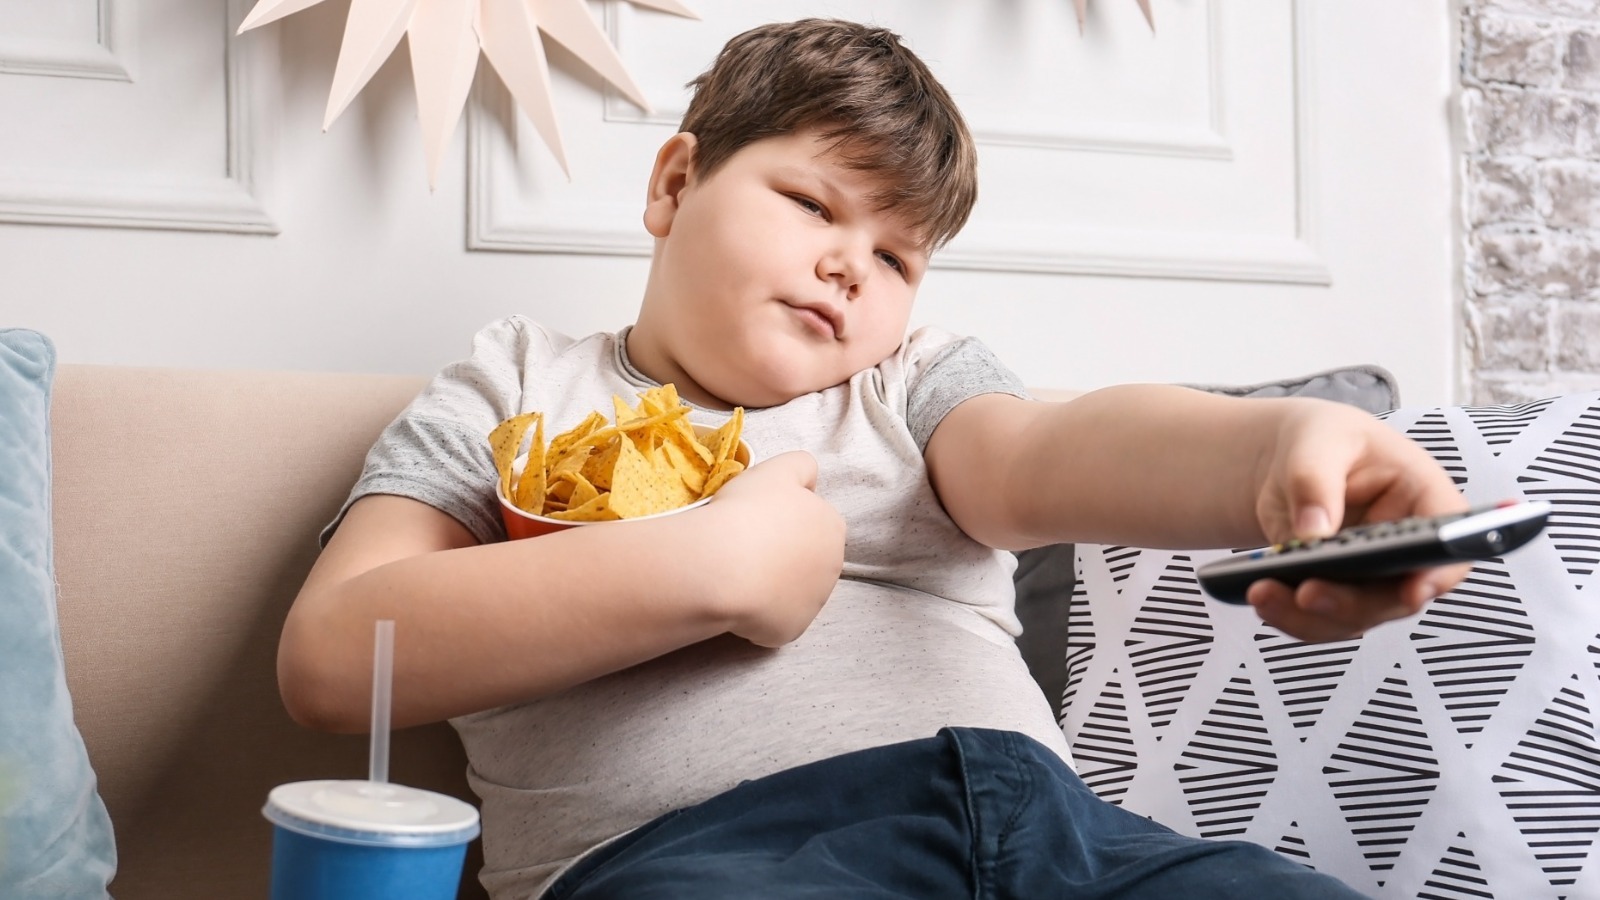 The Startling Link Between Adolescent Obesity And The Less Common Type 1 Diabetes